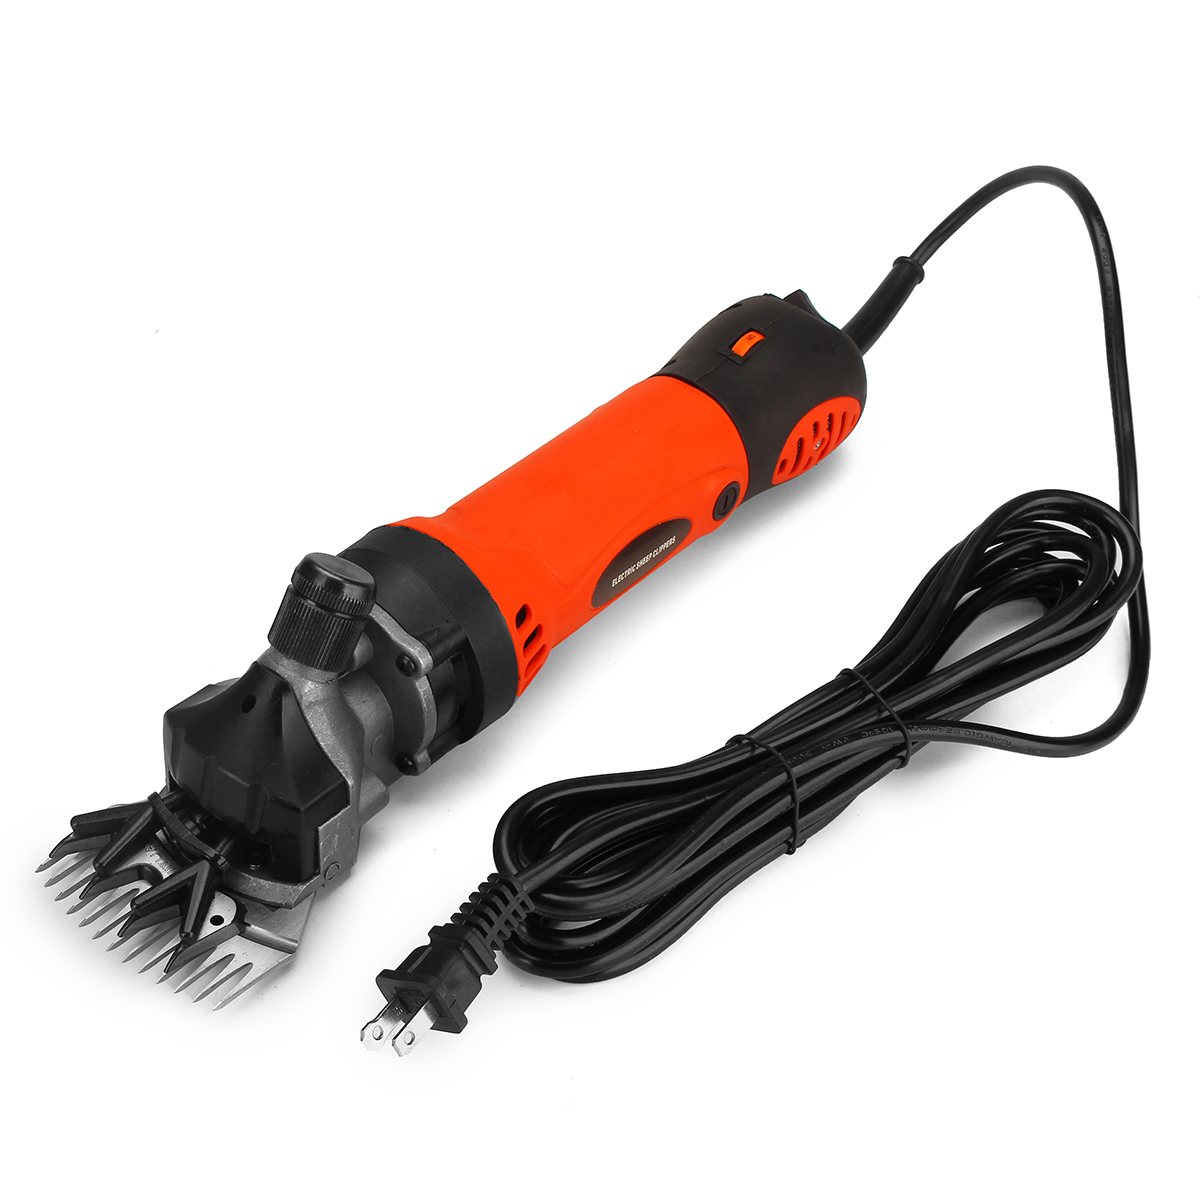 500W 110V Sheep Shears 6 Speed Professional Electric Shearing Clippers Electric Wool Shears Farm Animal Hair Clipper